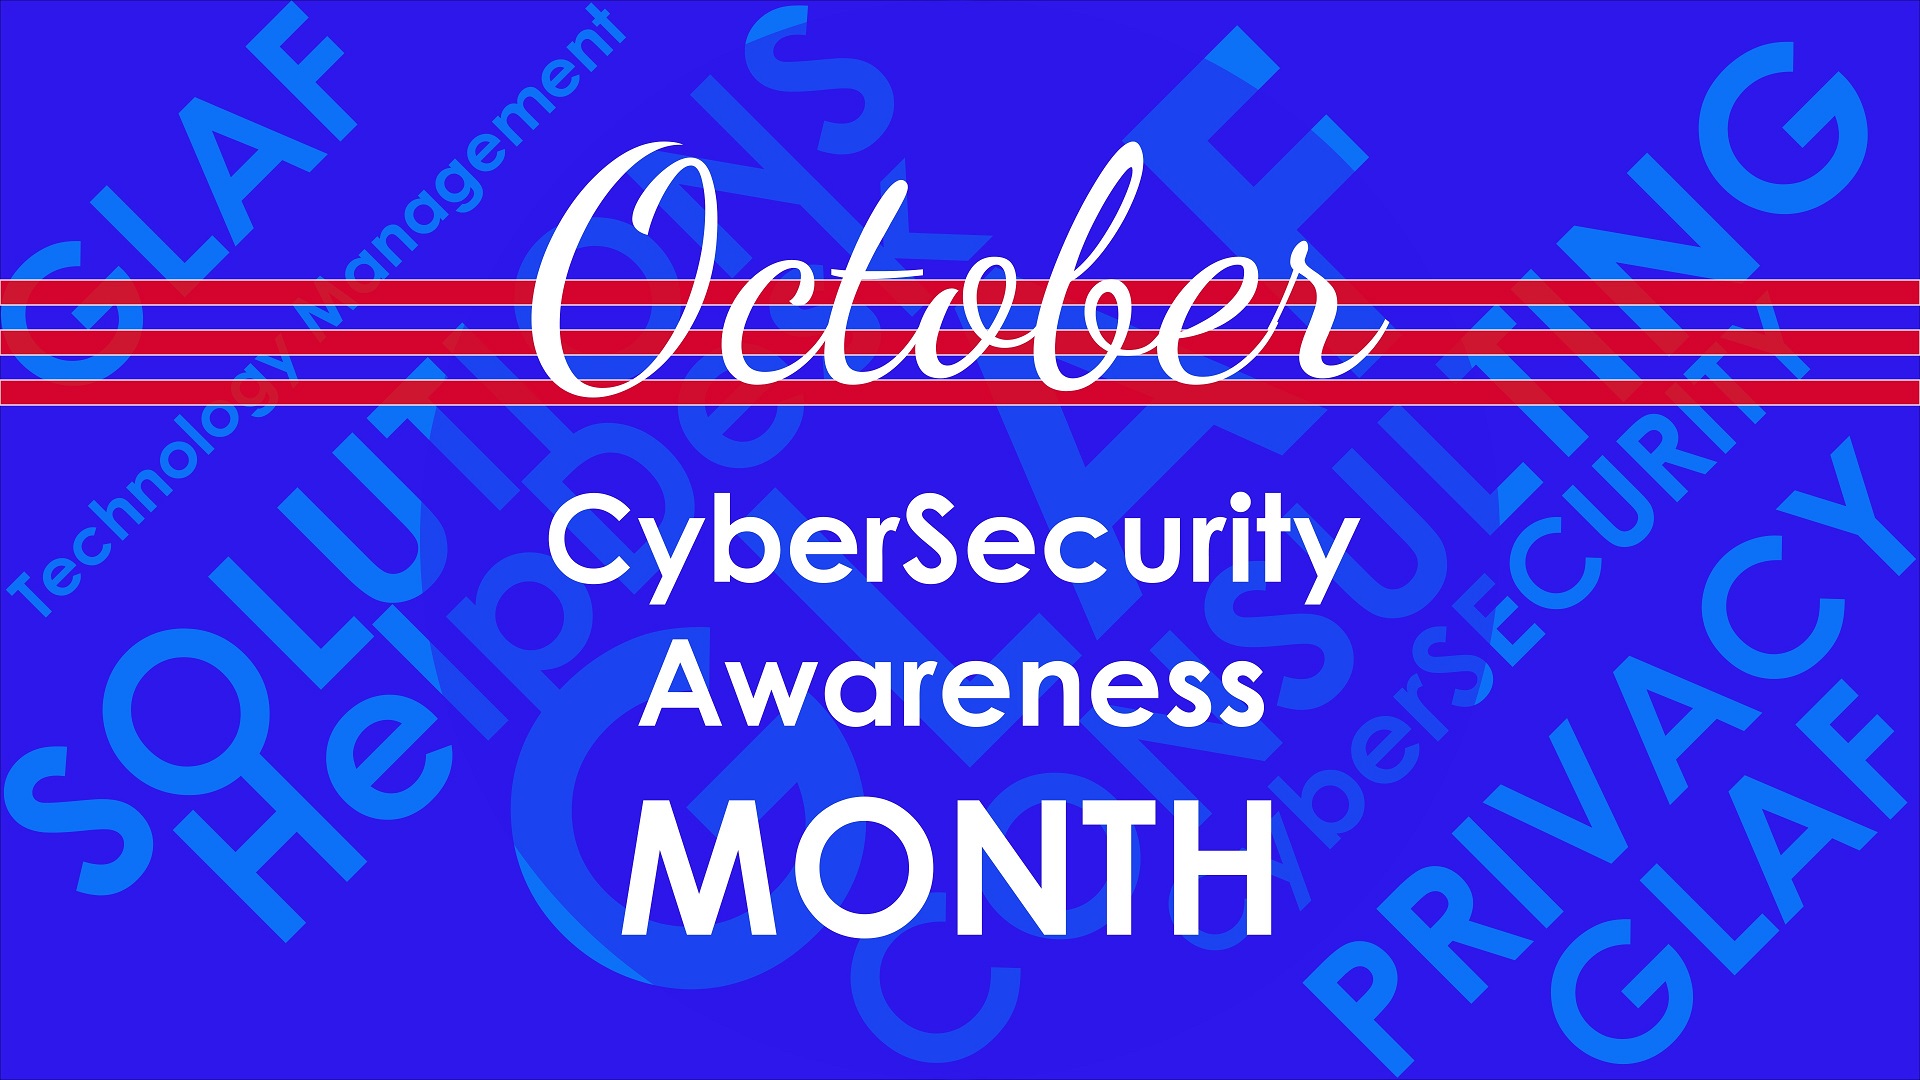 October is CyberSecurity Awareness Month